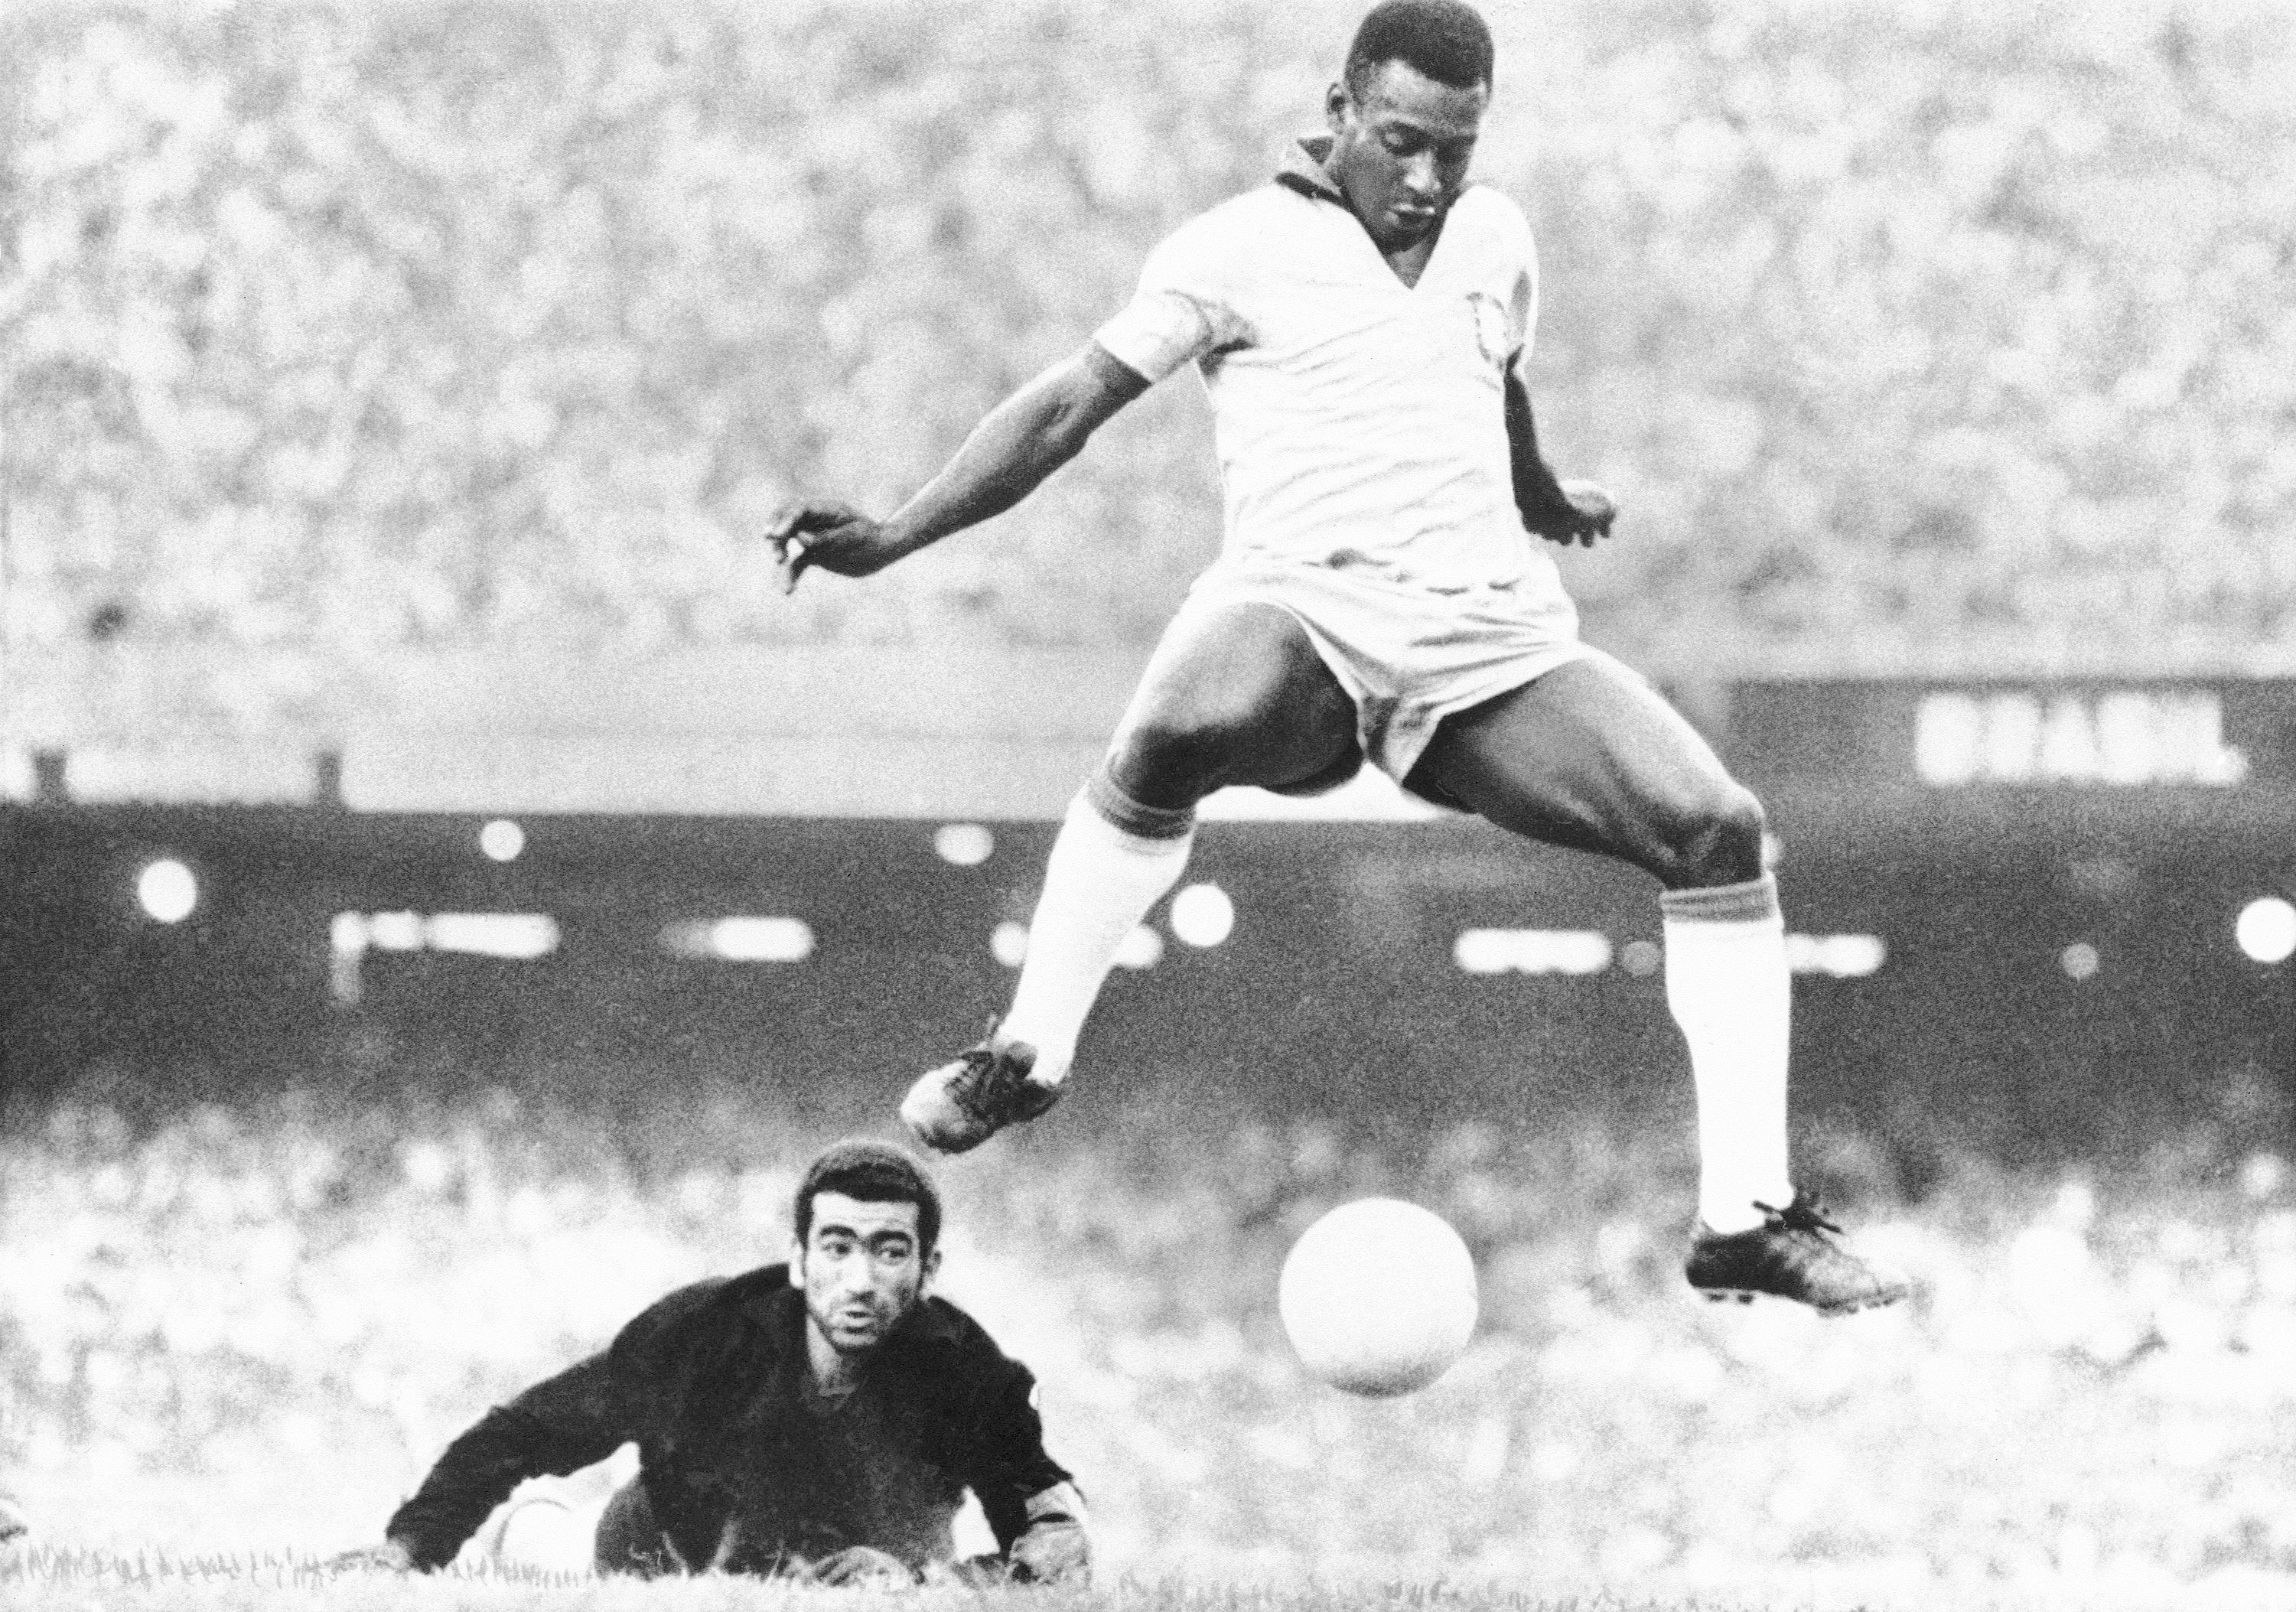 Is today's footballing standards much better than when Pele